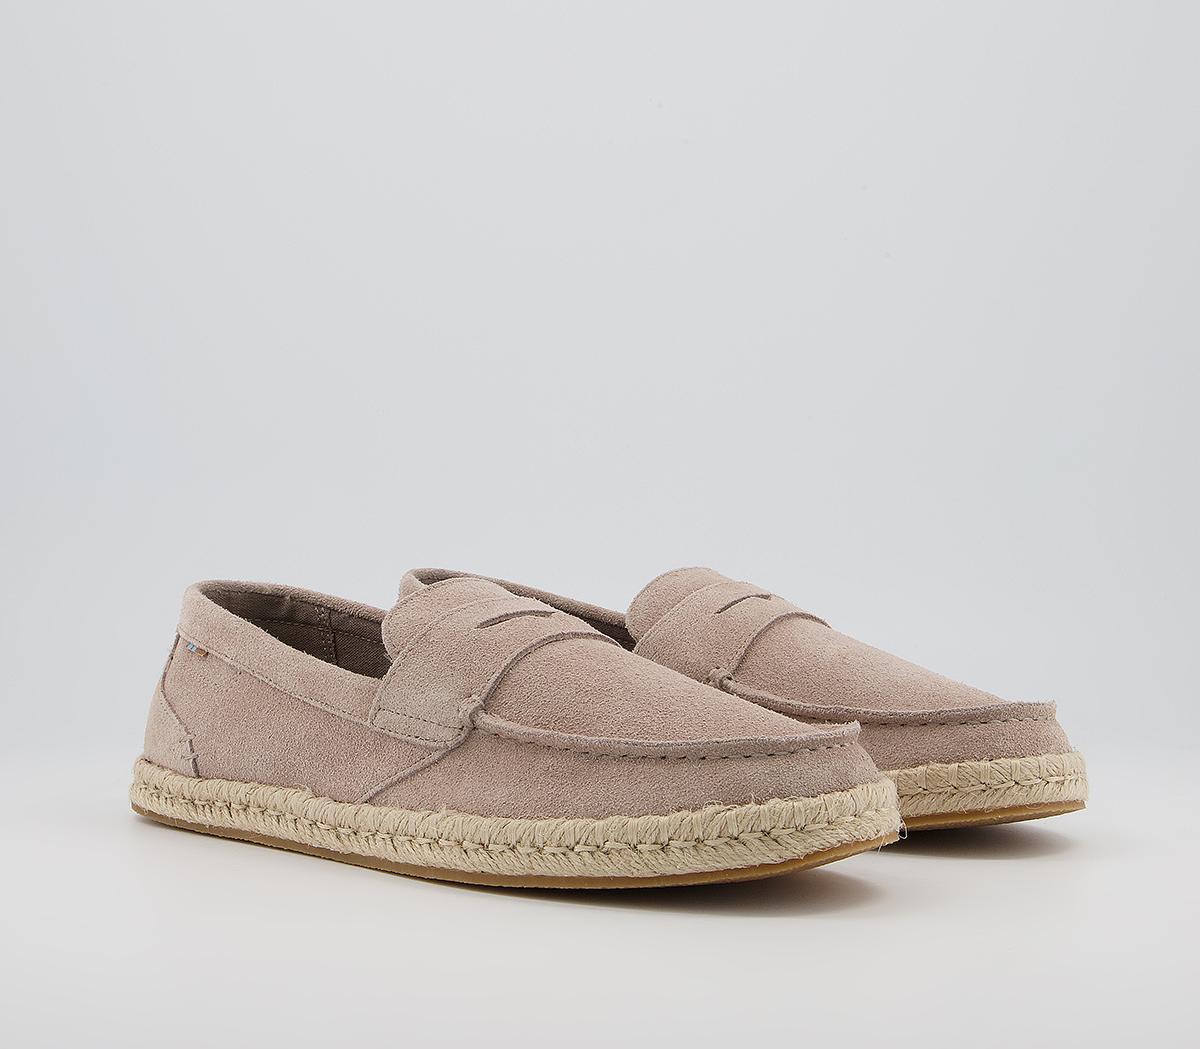 TOMS Stanford Rope Espadrilles Taupe Suede - Men's Casual Shoes